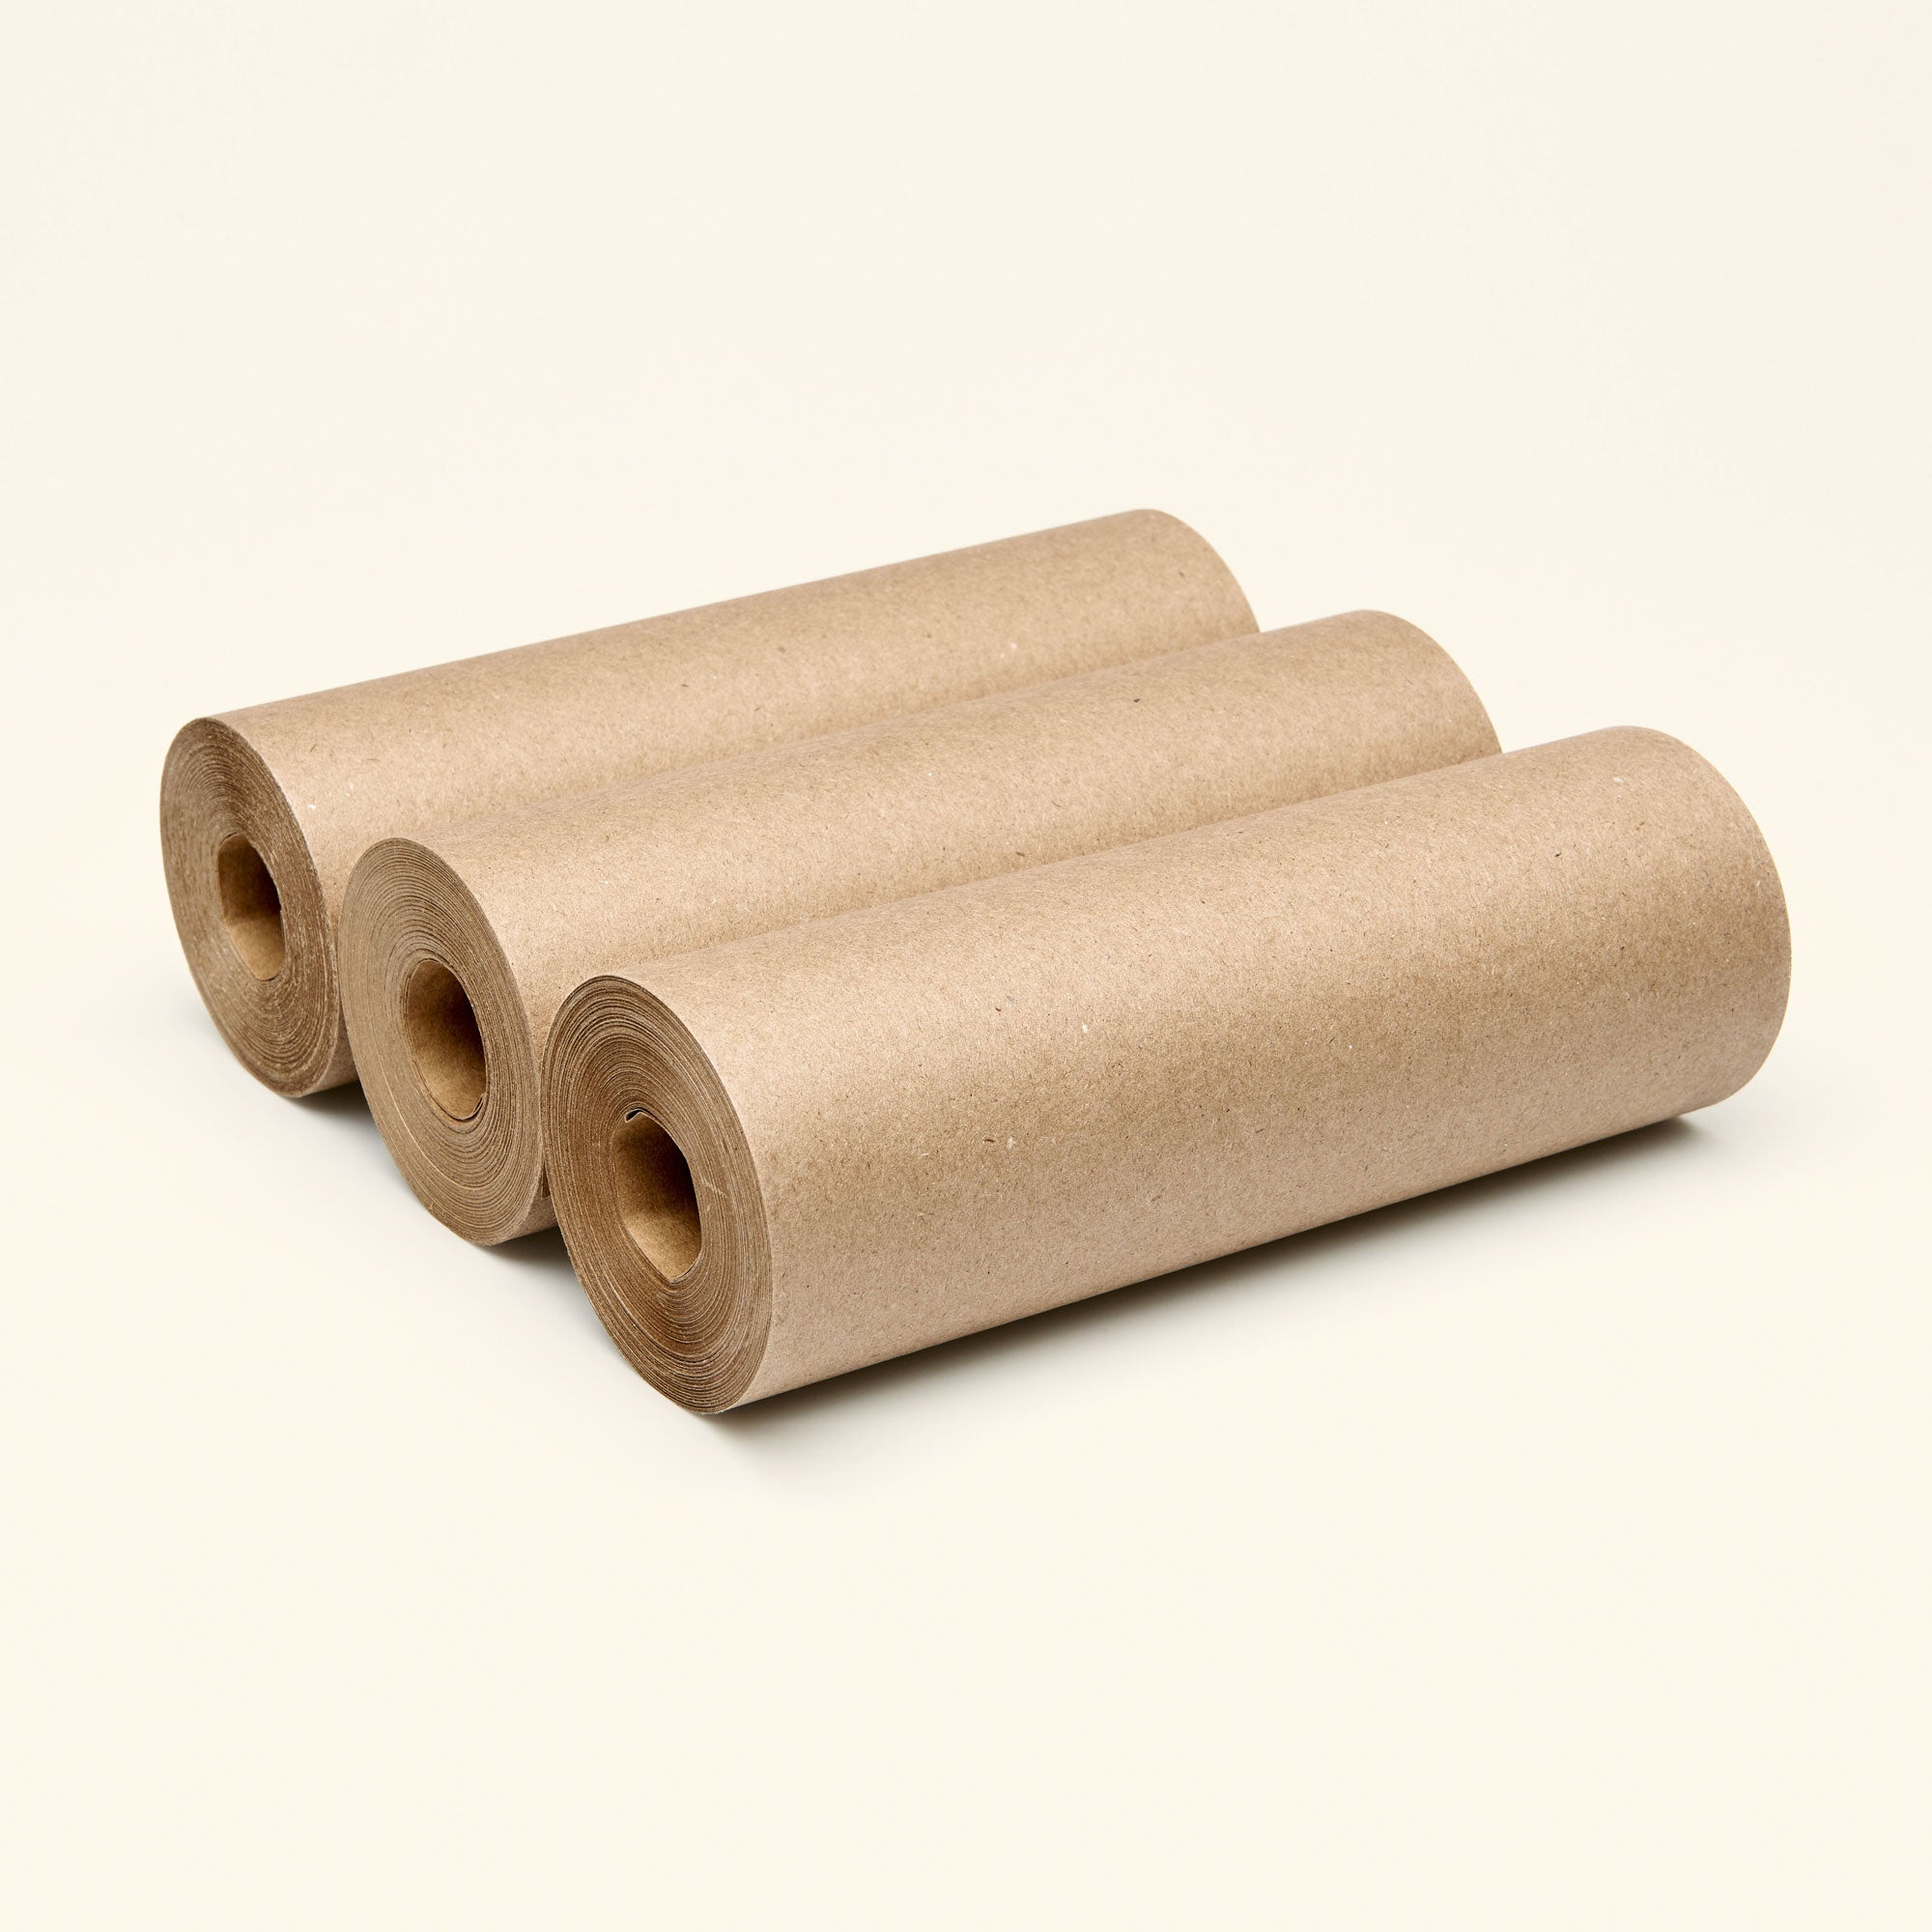 Daily Roller Rolls - 3 Pack - George & Willy EU